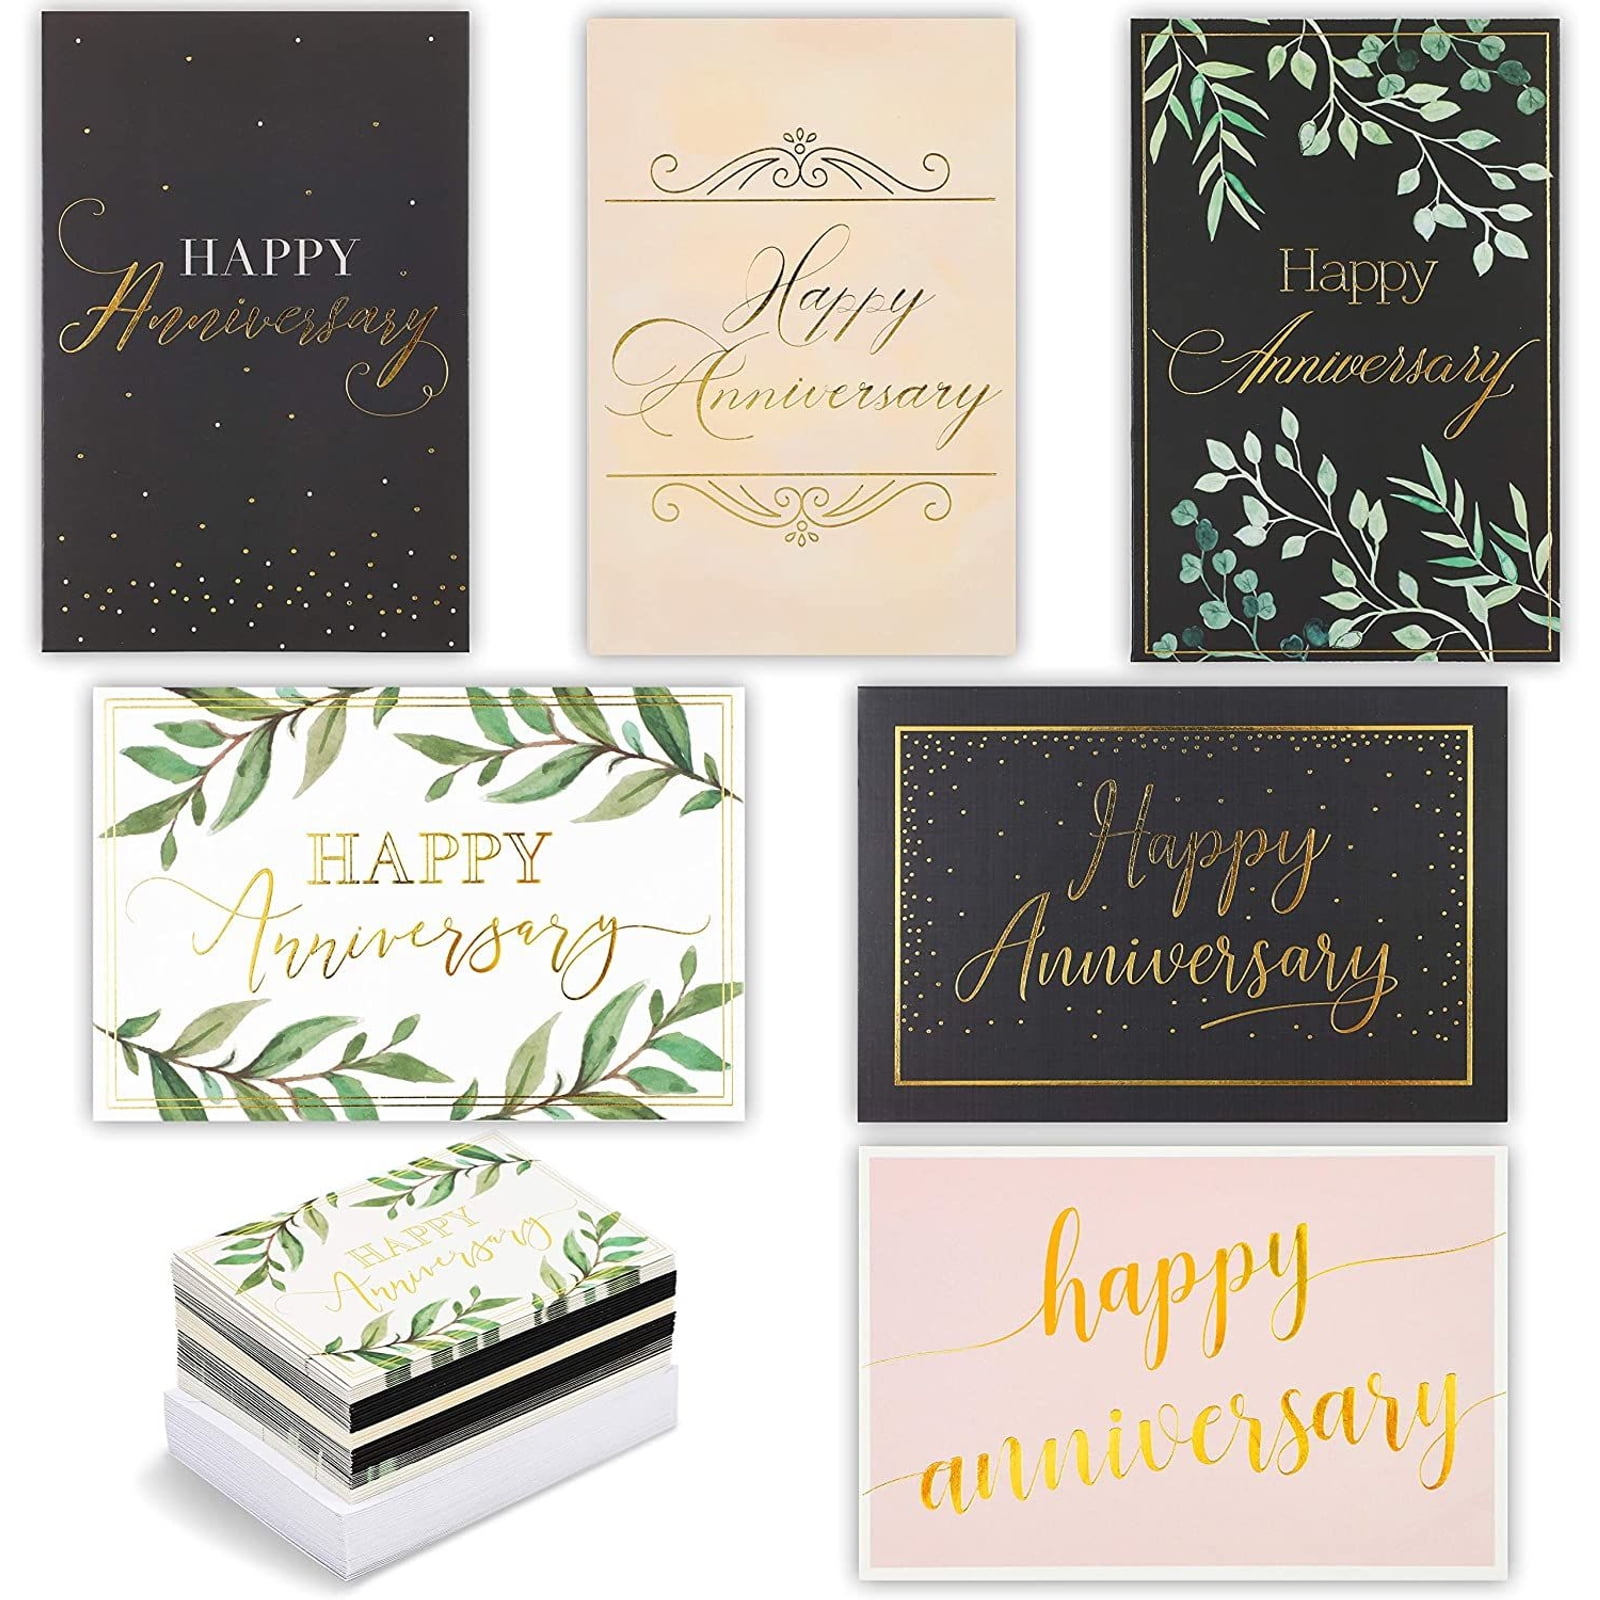 Wedding Gift Card with Envelope Deluxe Baby Anniversary Choose Design 